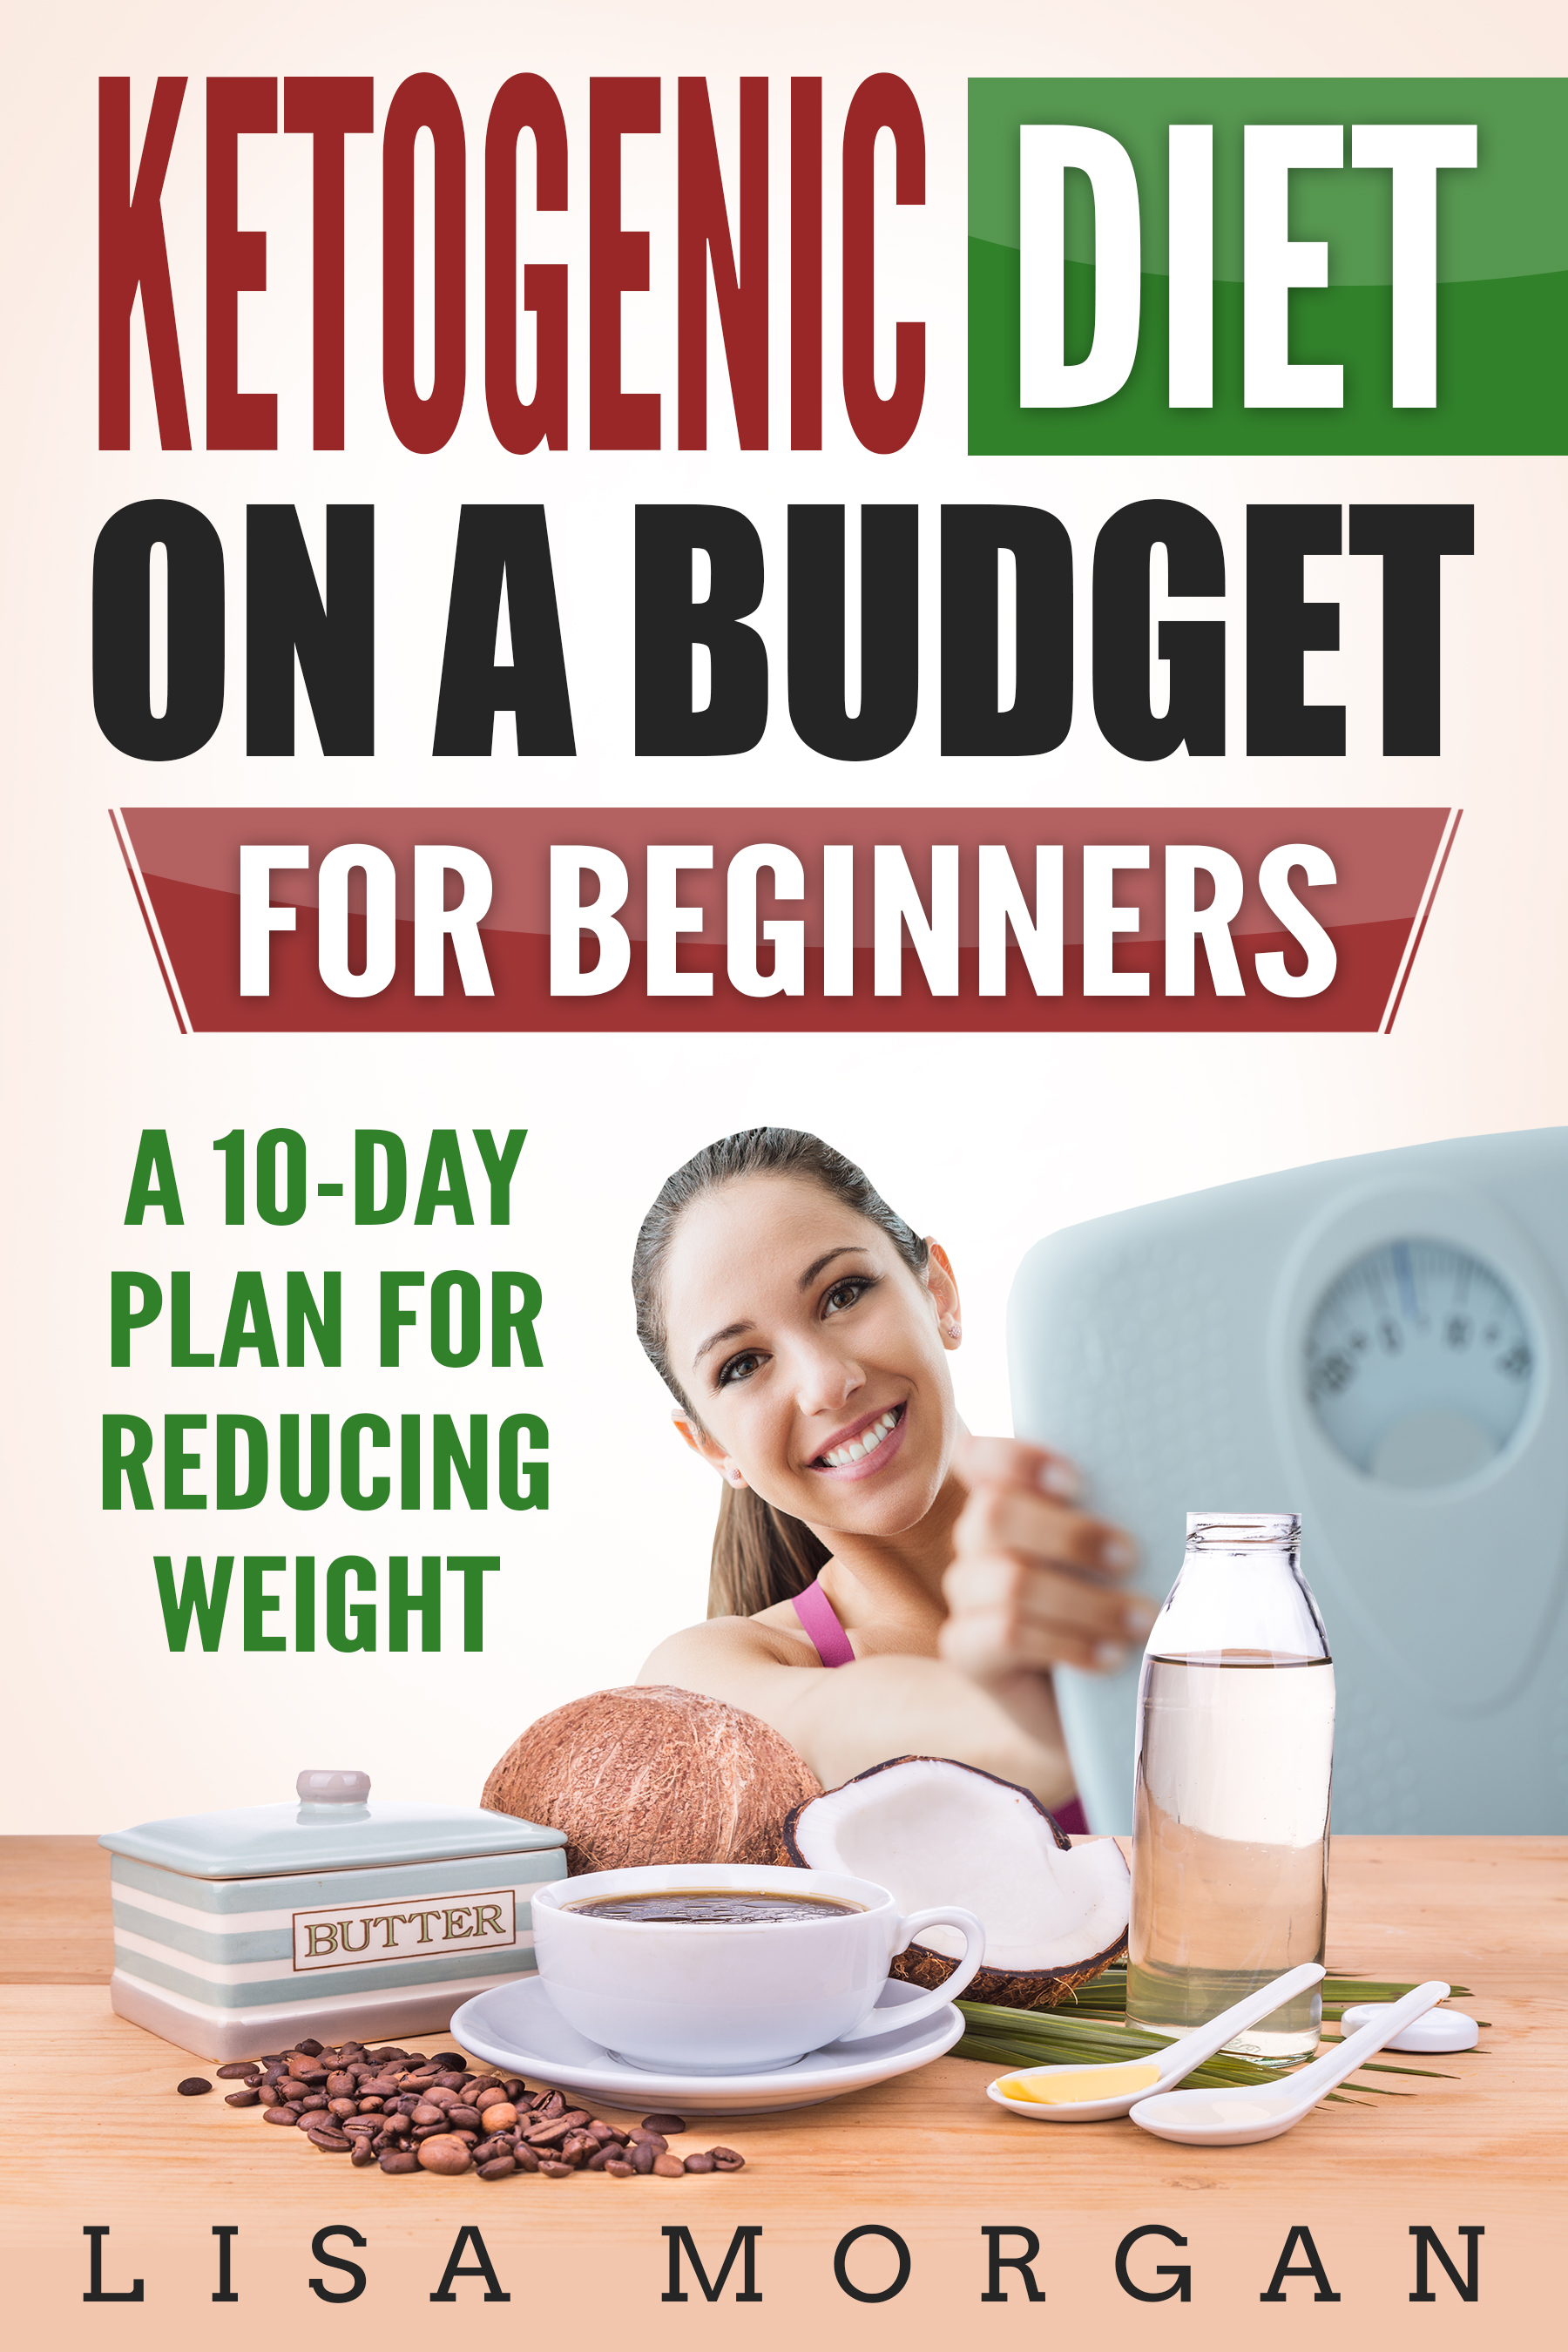 FREE: Ketogenic Diet on a Budget for Beginners, a 10-day Plan for Reducing Weight by Lisa Morgan